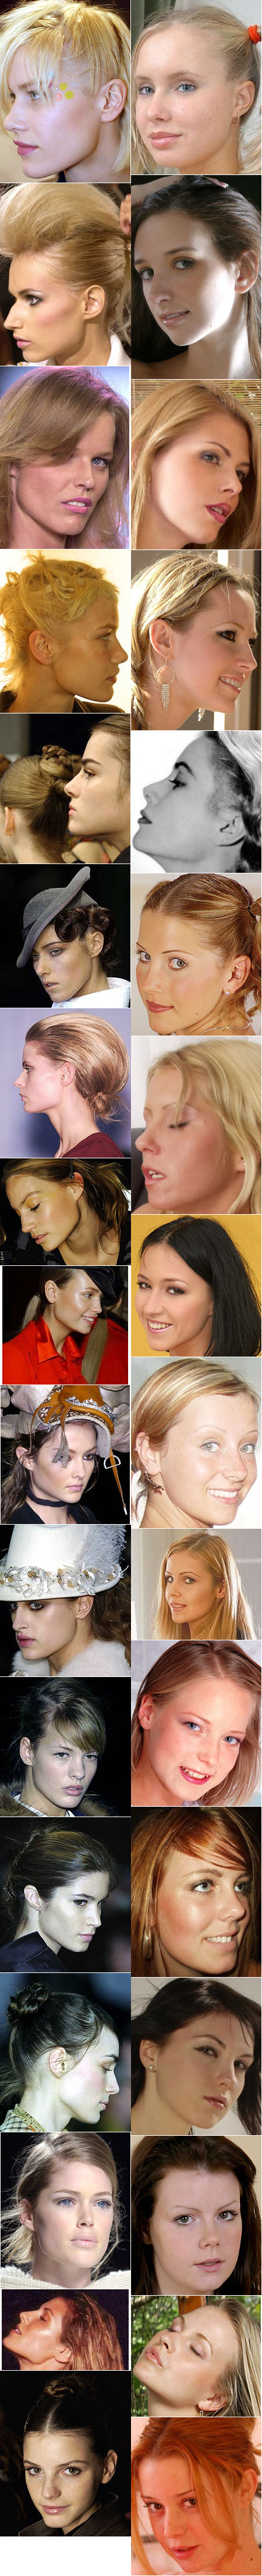 The jaw structure of high-fashion models contrasted with that of feminine glamour models.